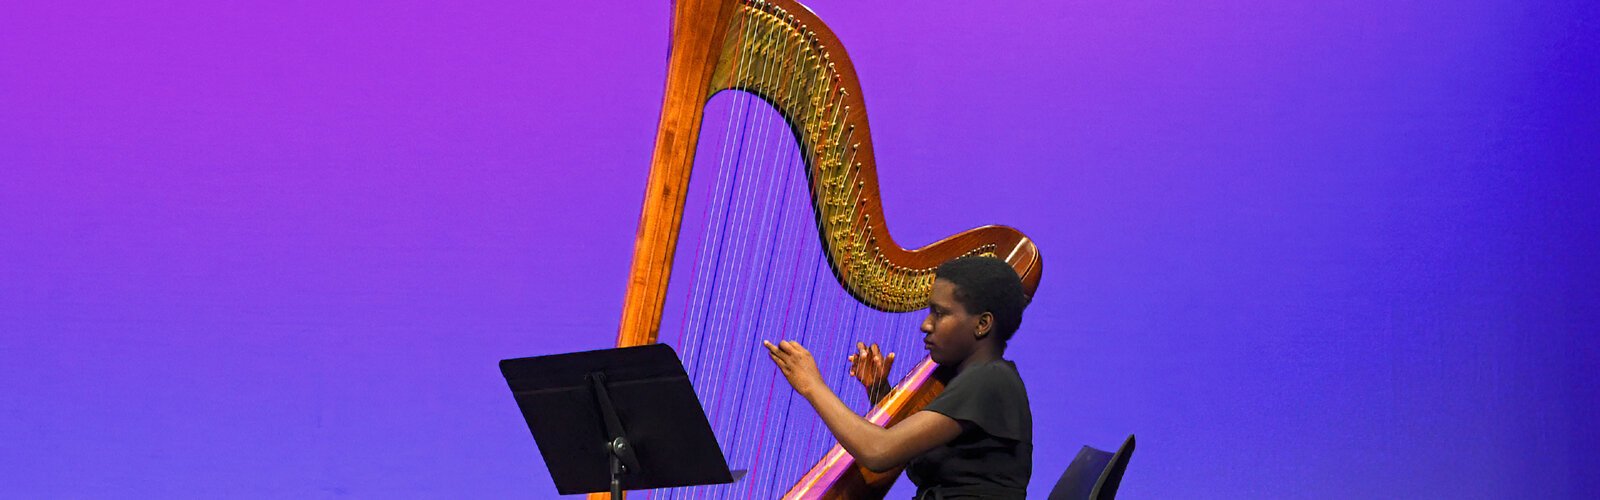 Ashley Cox, of the Hillsborough Community College Music Department, performs at the harp for a solo musical piece on stage at the New Tampa Performing Arts Center.